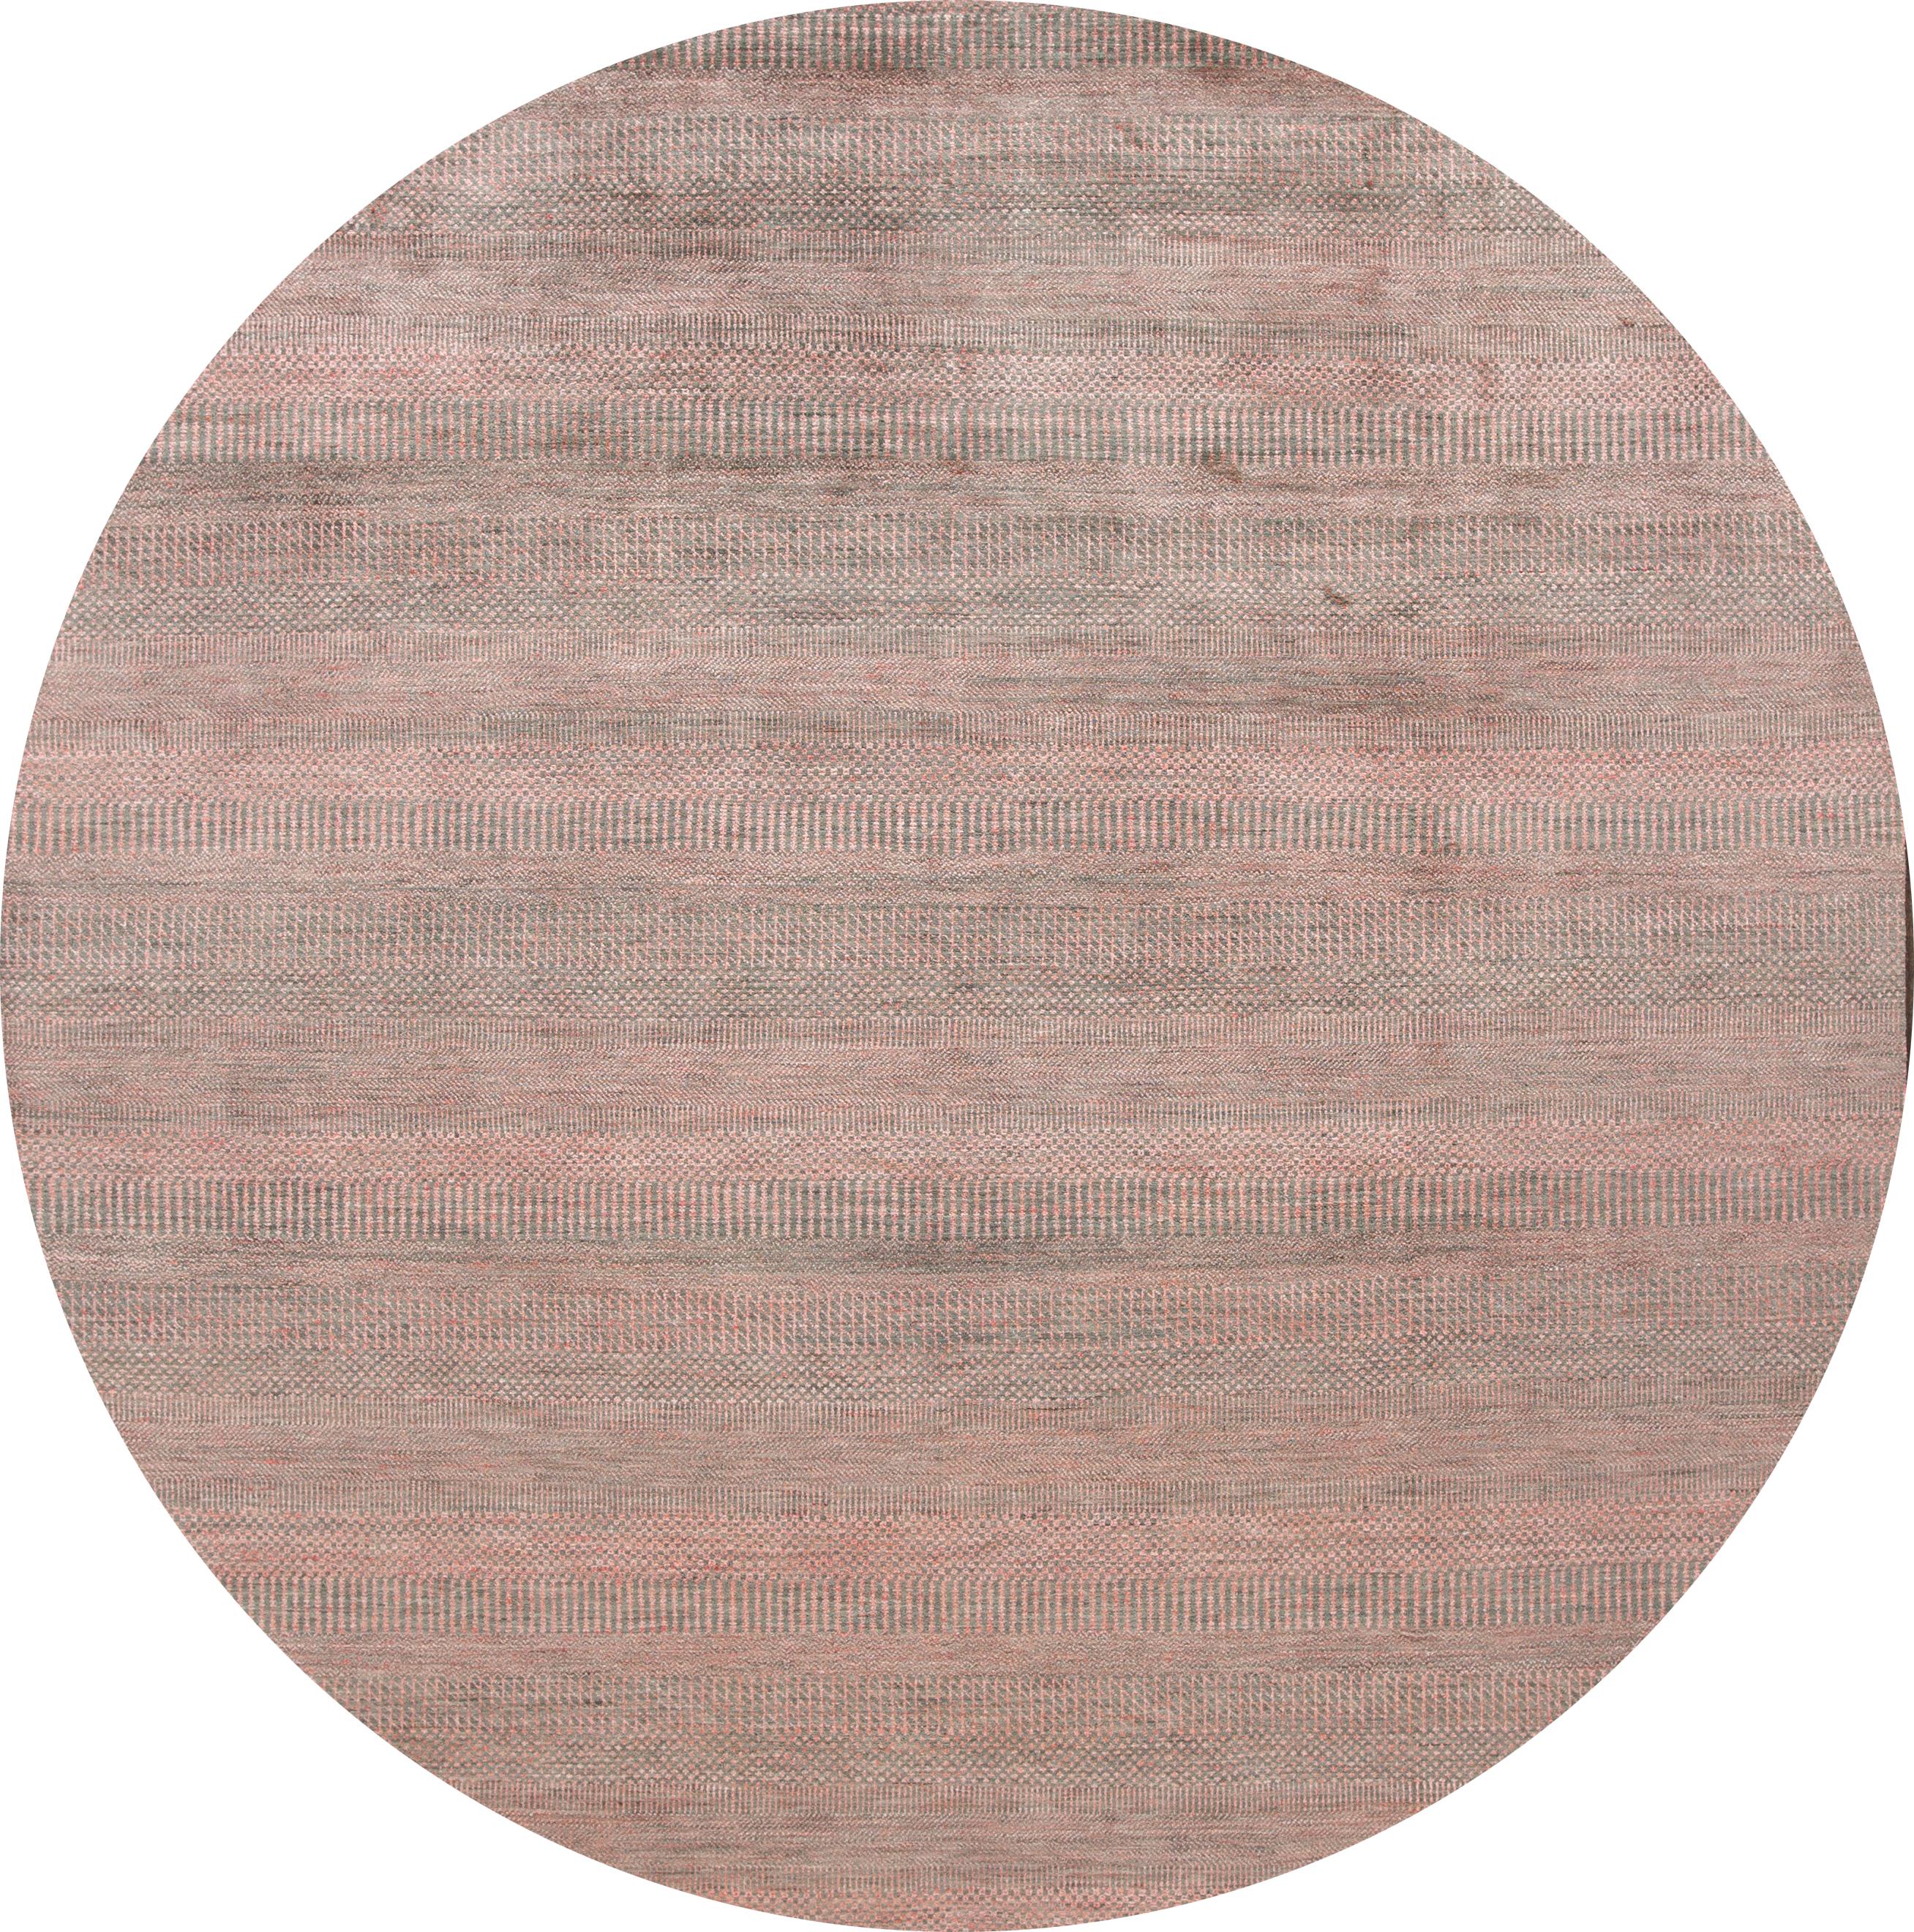 21st century contemporary transitional Savannah rug with a solid gray/rose-colored motif. This piece has fine details, great colors, and a beautiful design.

This rug measures 8'10